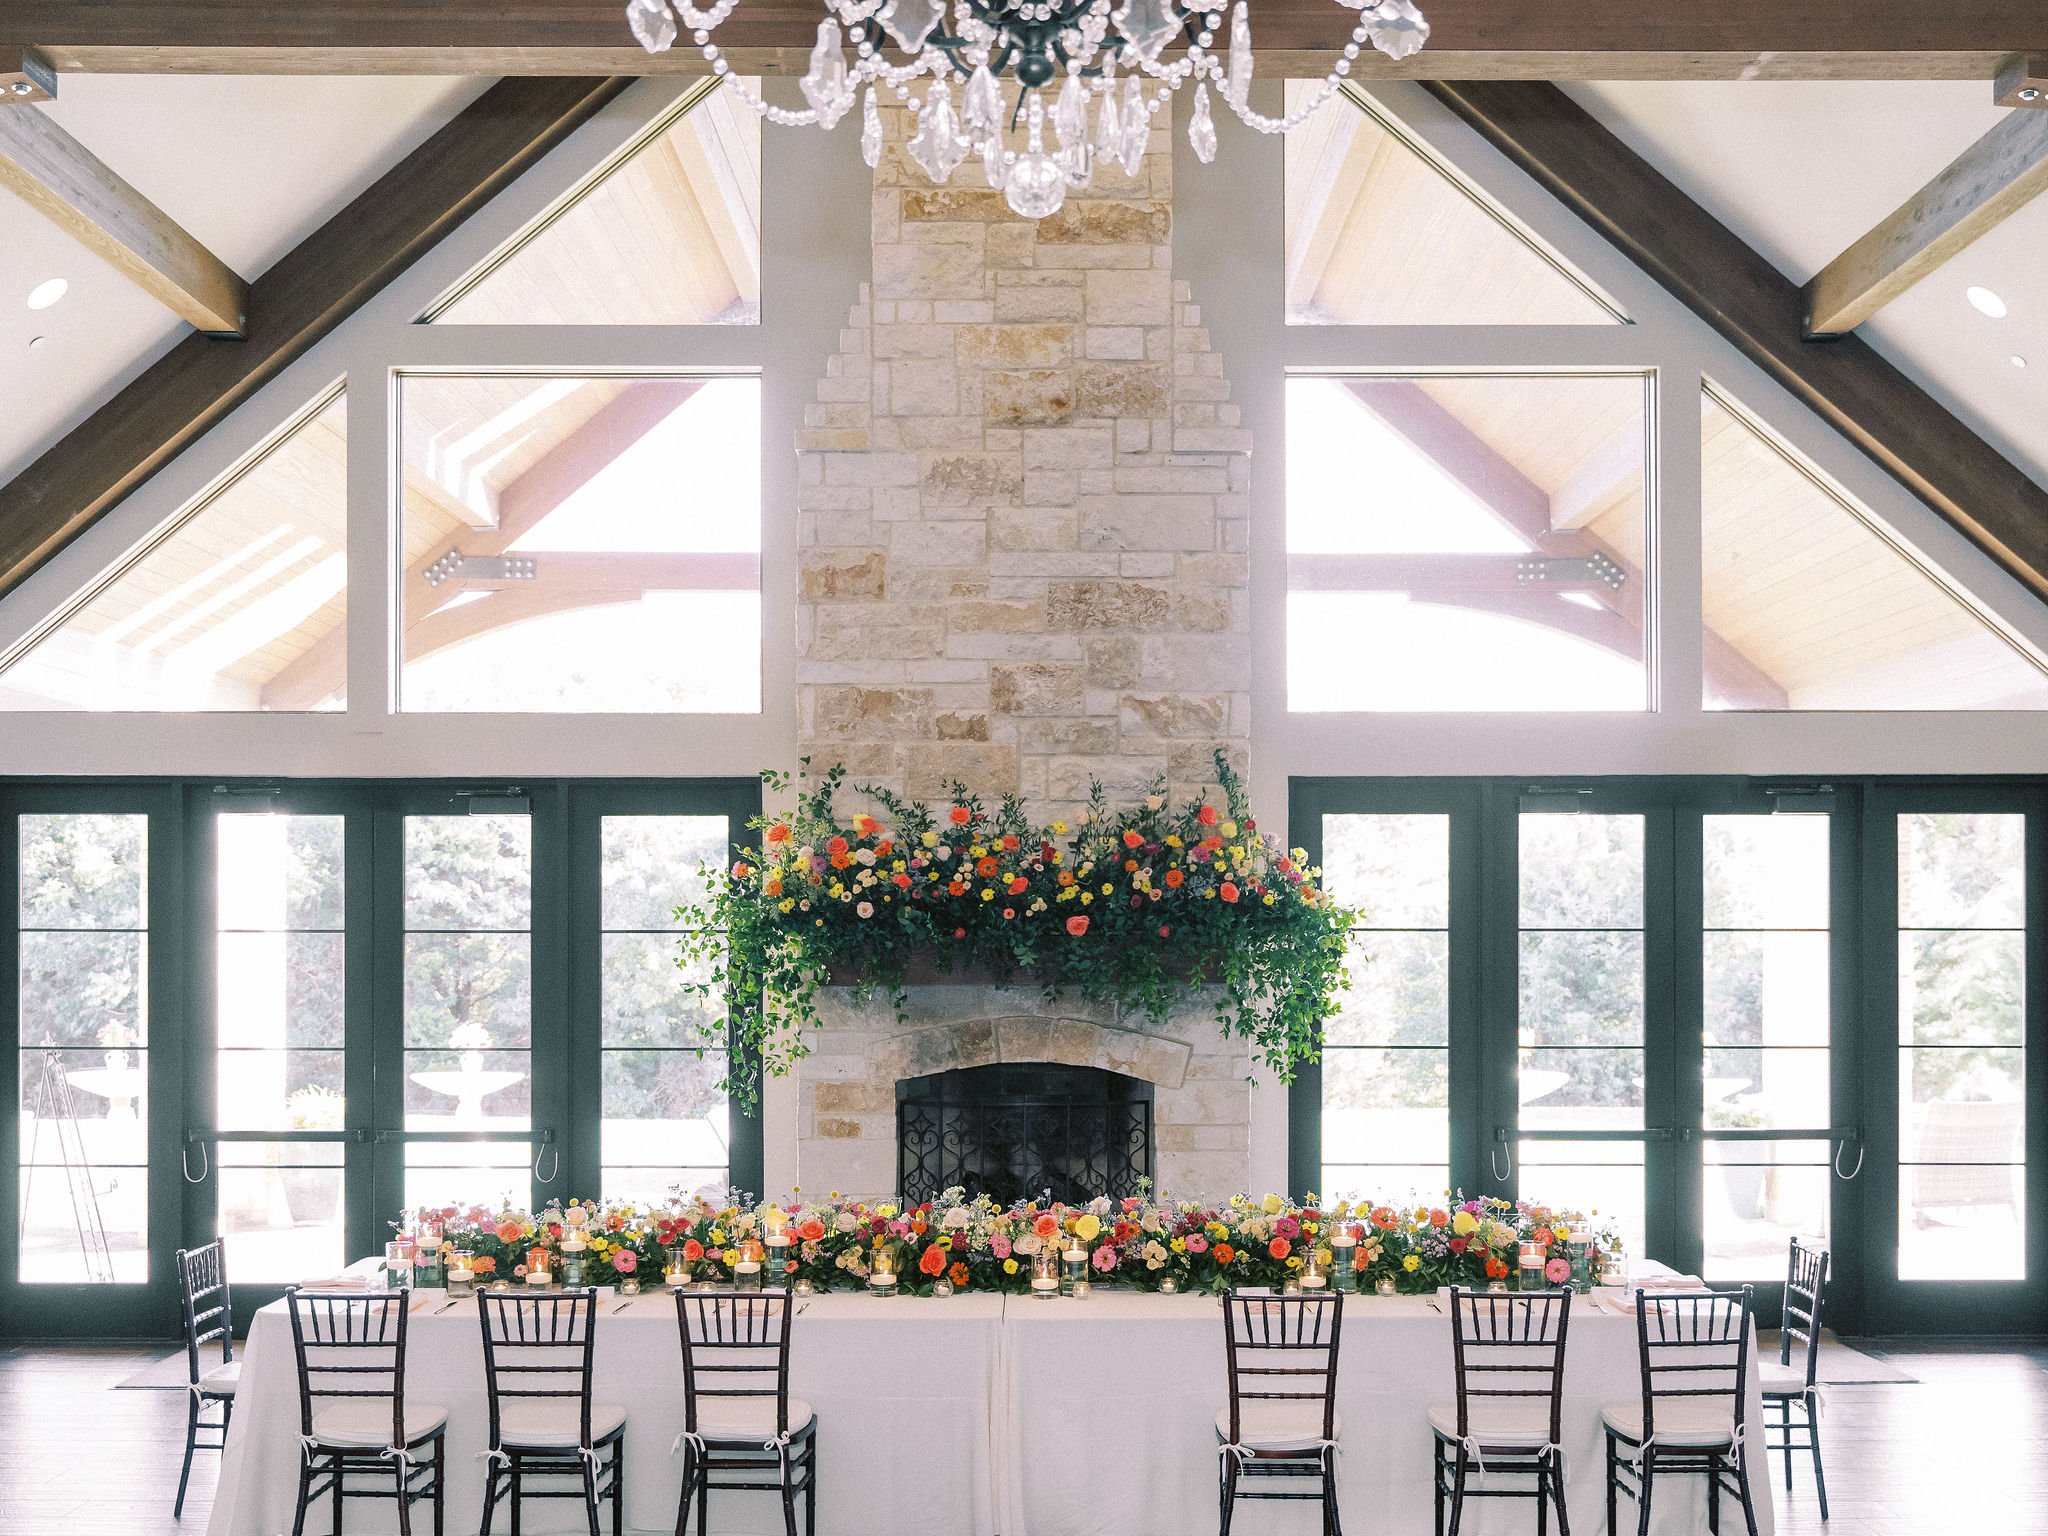   Kate Panza Photography    Teri’s Floral    Emerald Aisle Weddings and Events  